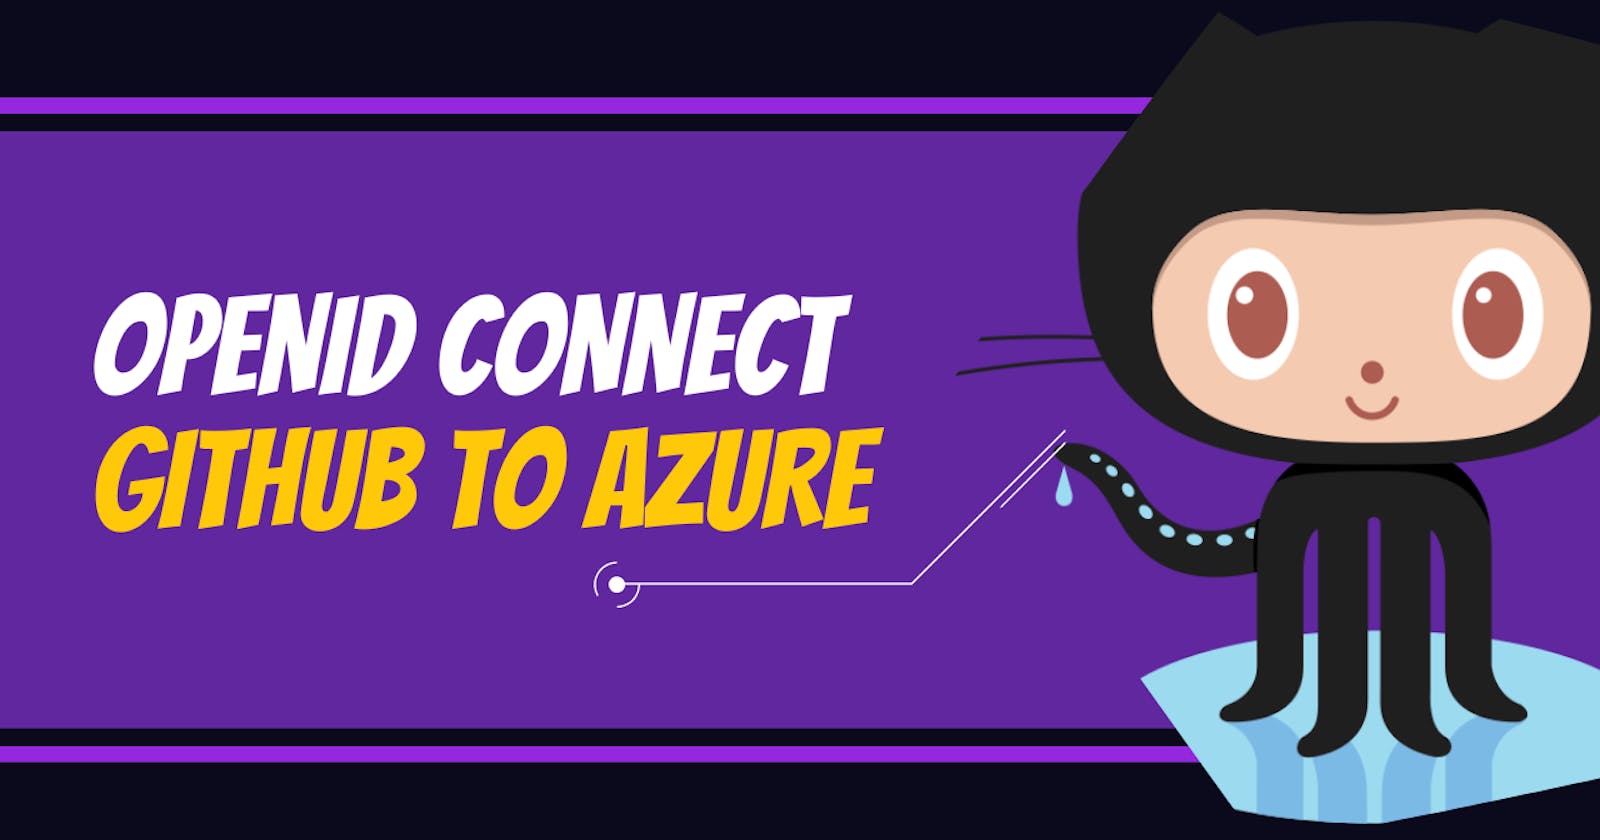 Using OpenID Connect to access Azure from GitHub